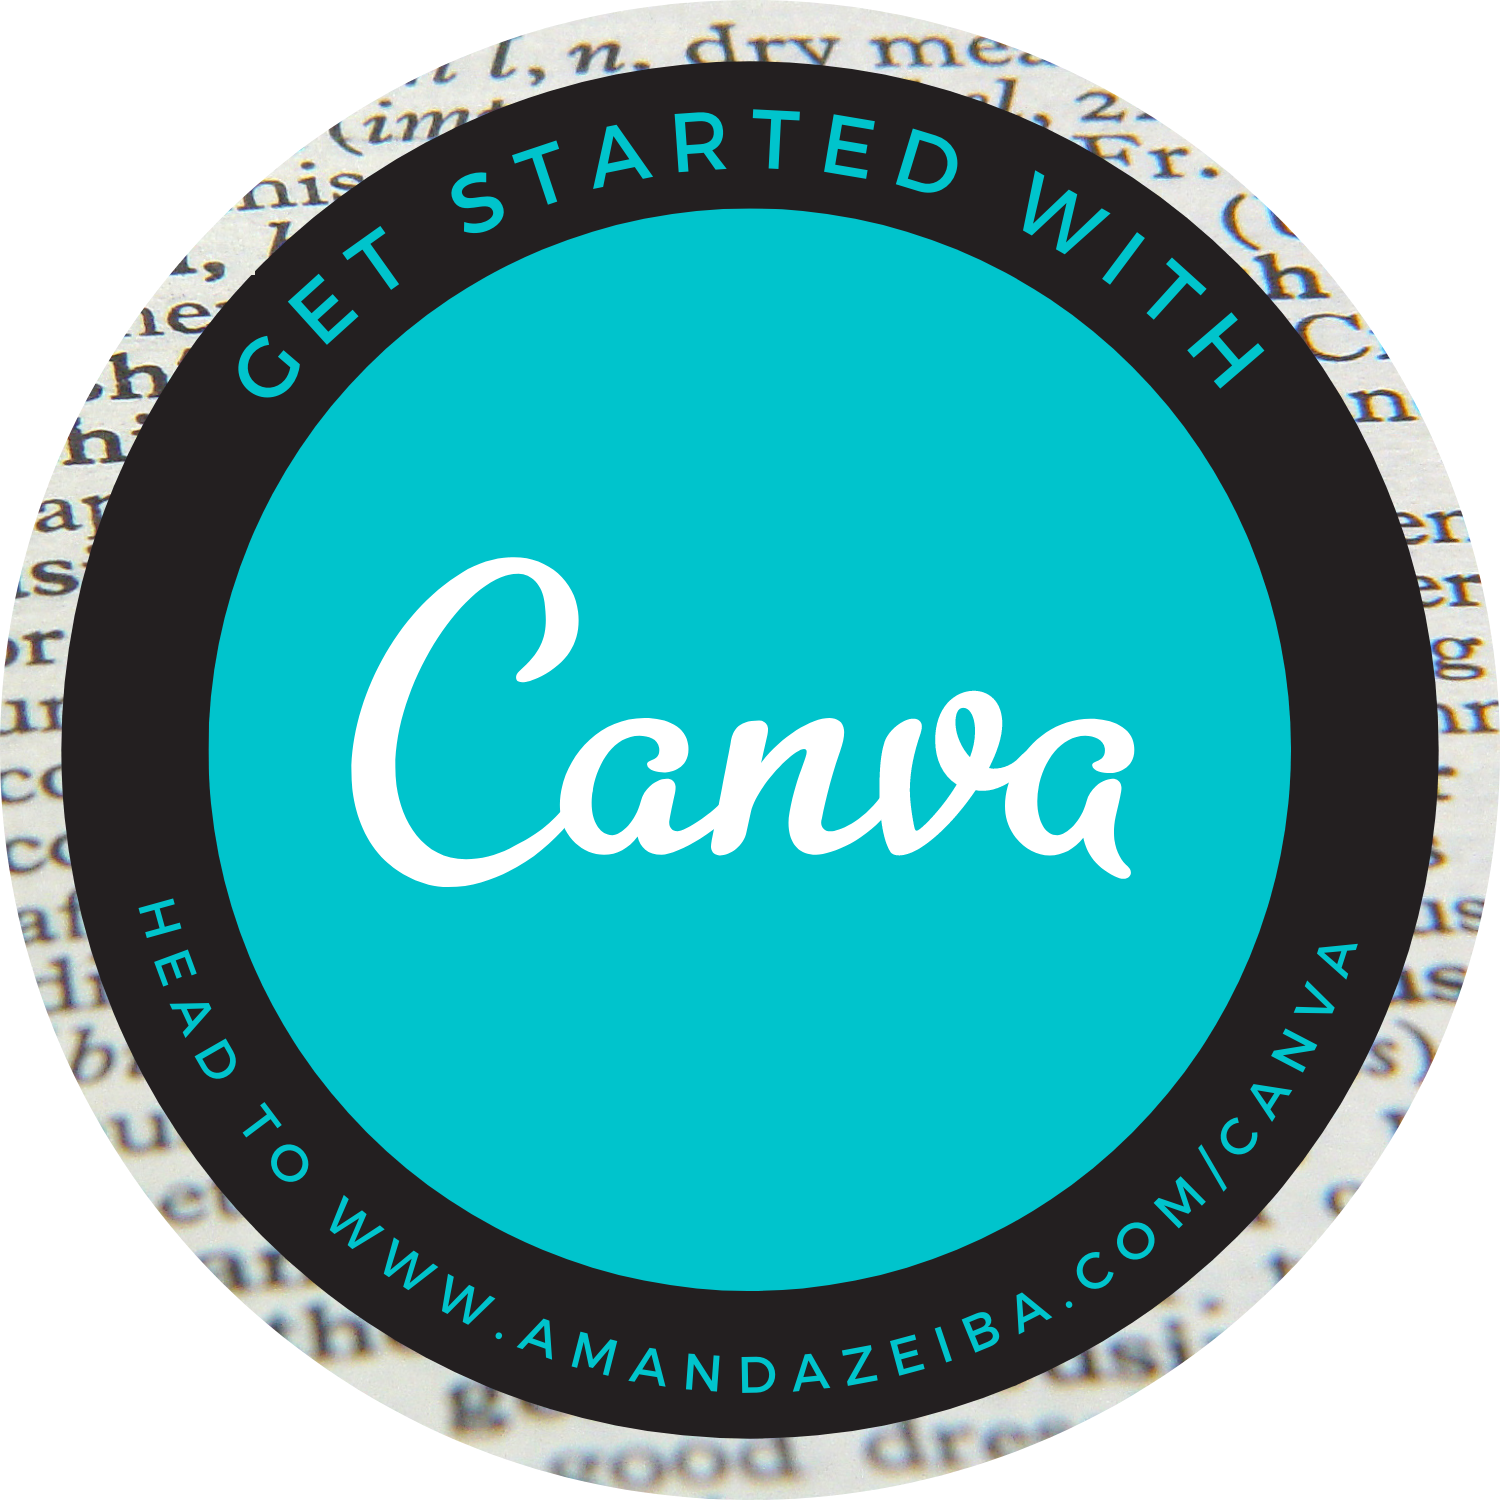 Get started with Canva